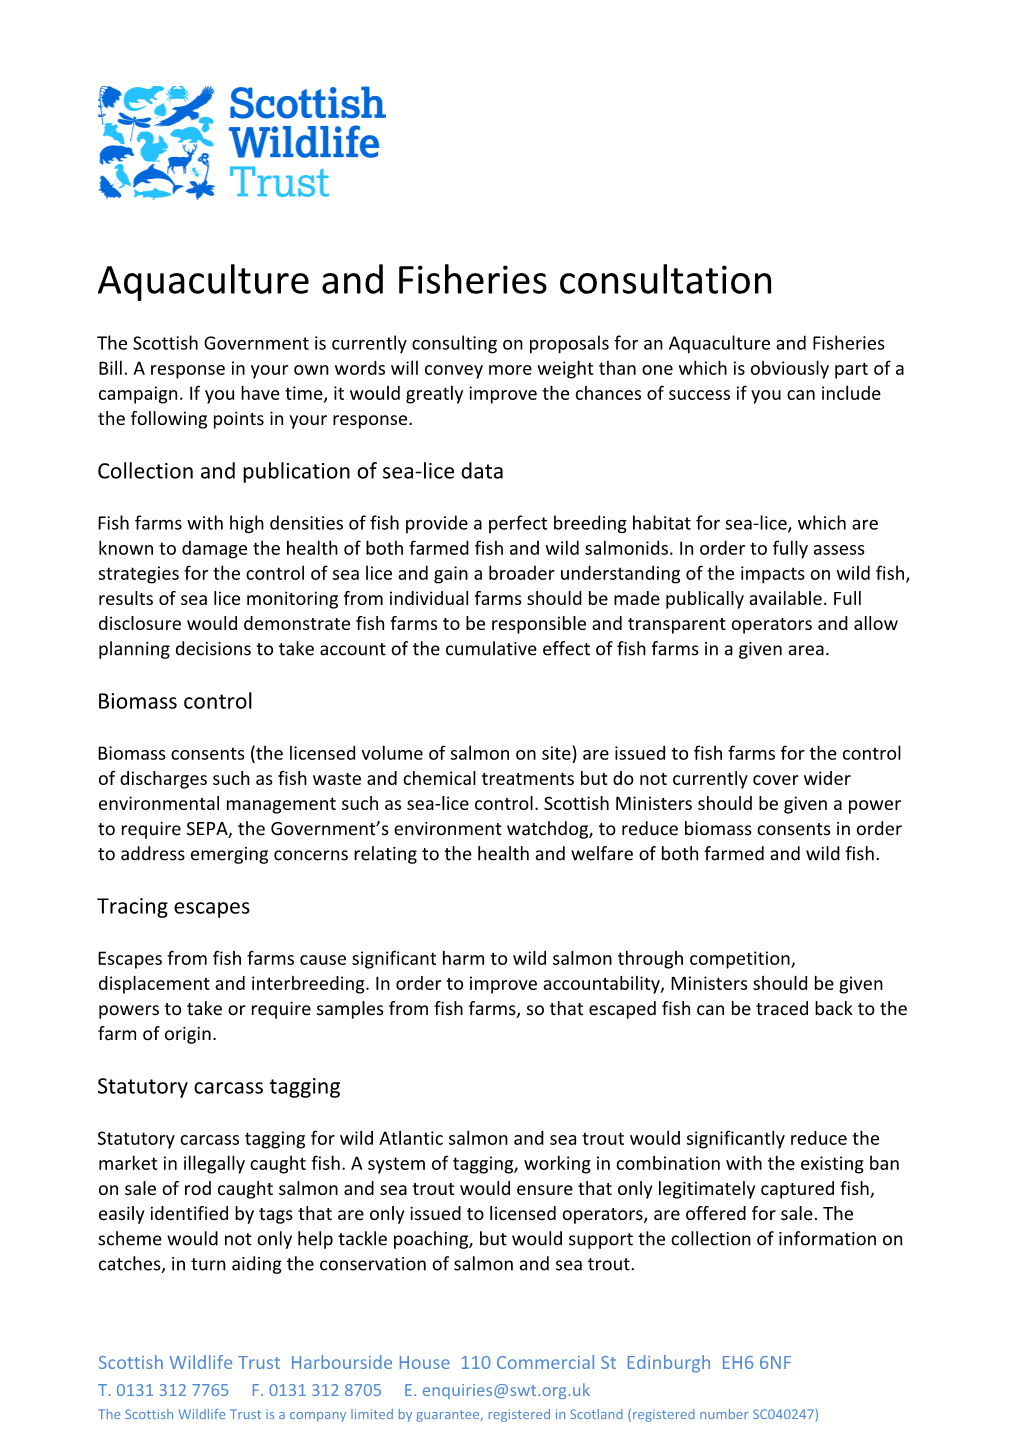 Aquaculture and Fisheries Consultation